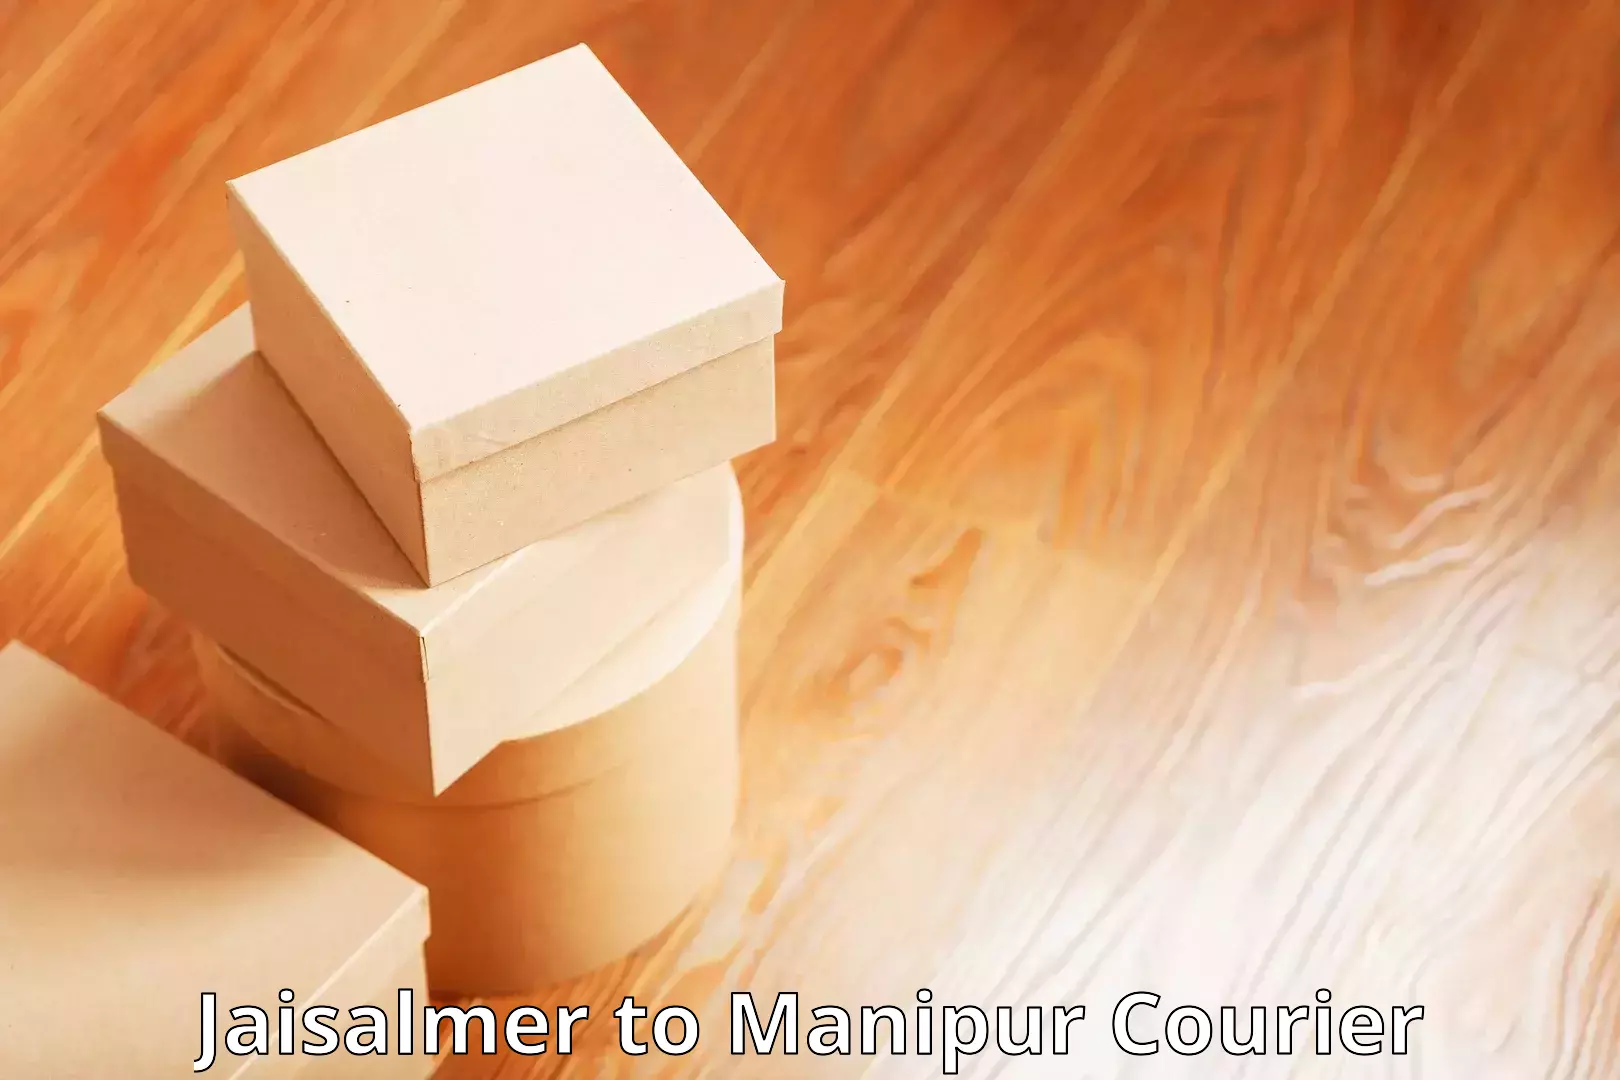 Automated shipping processes Jaisalmer to Manipur